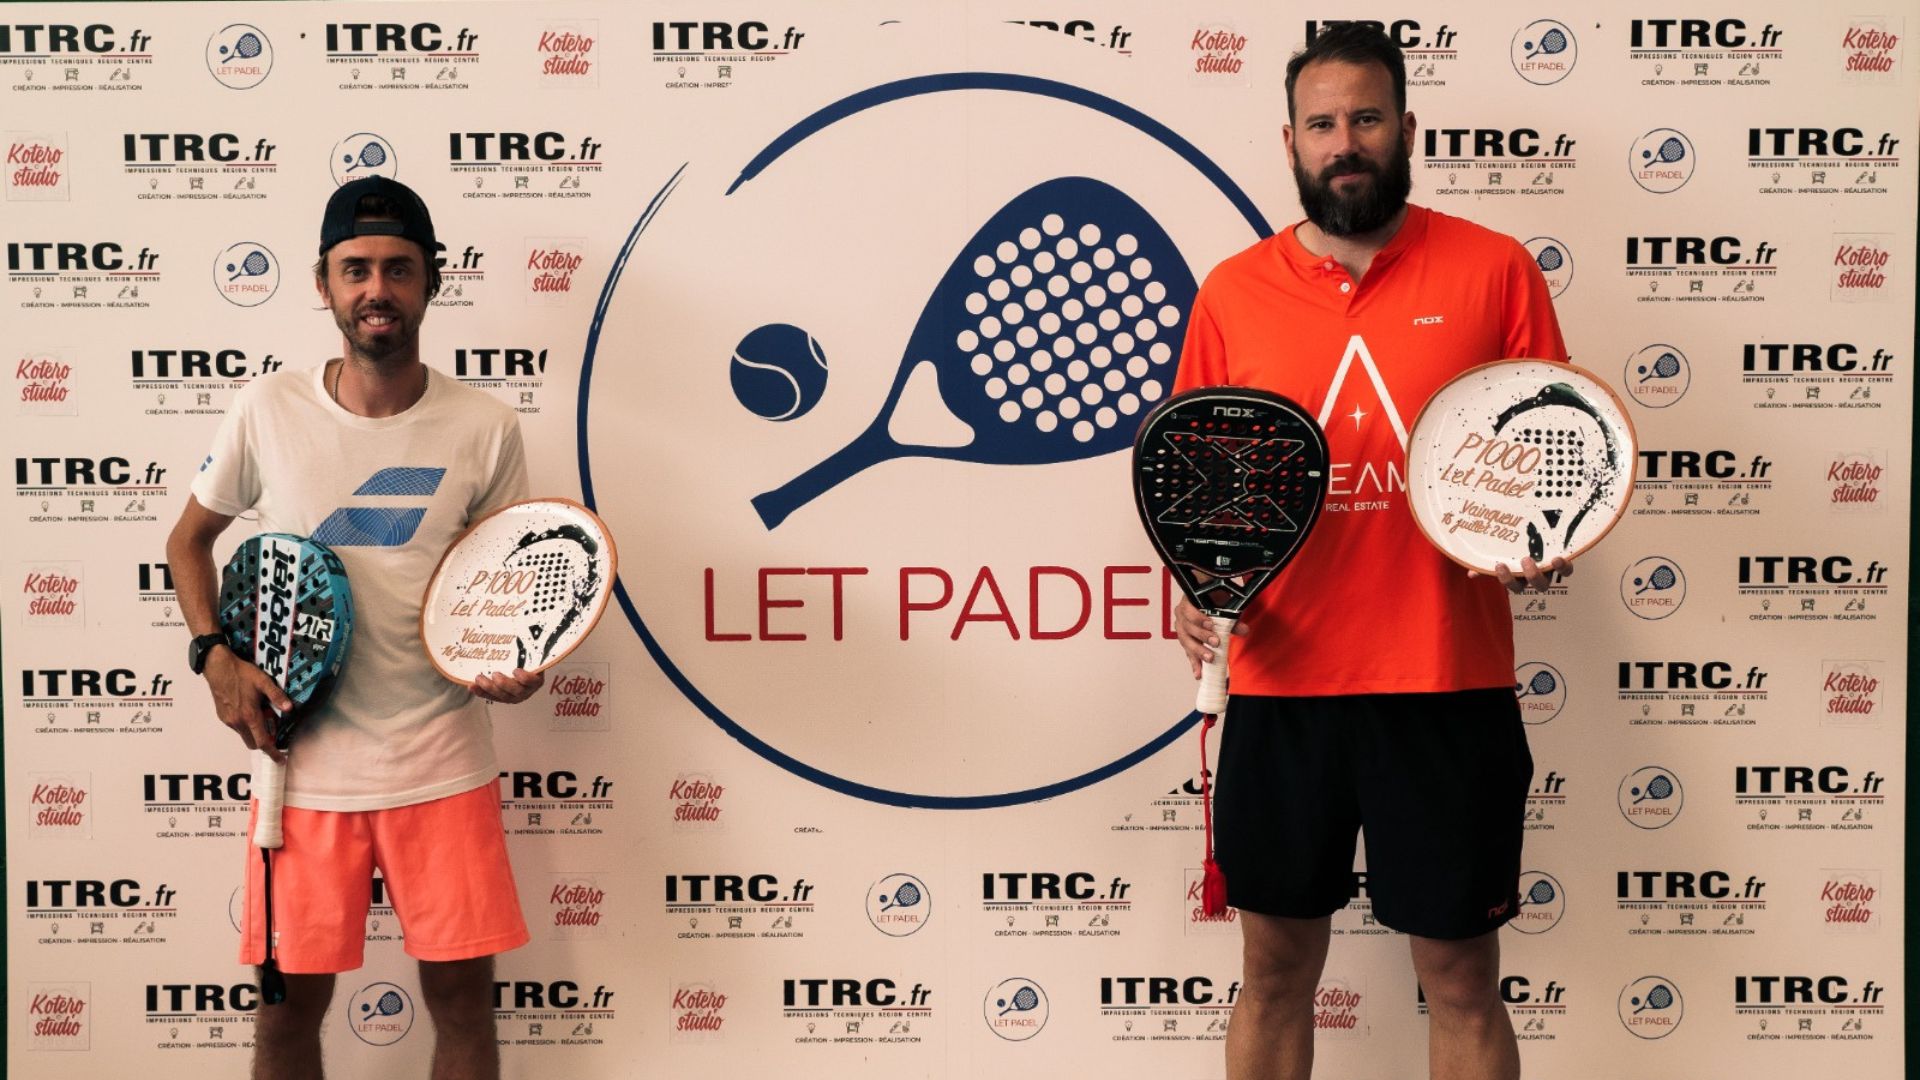 P1000 Let Padel : Rouanet/Maigret come ovvio